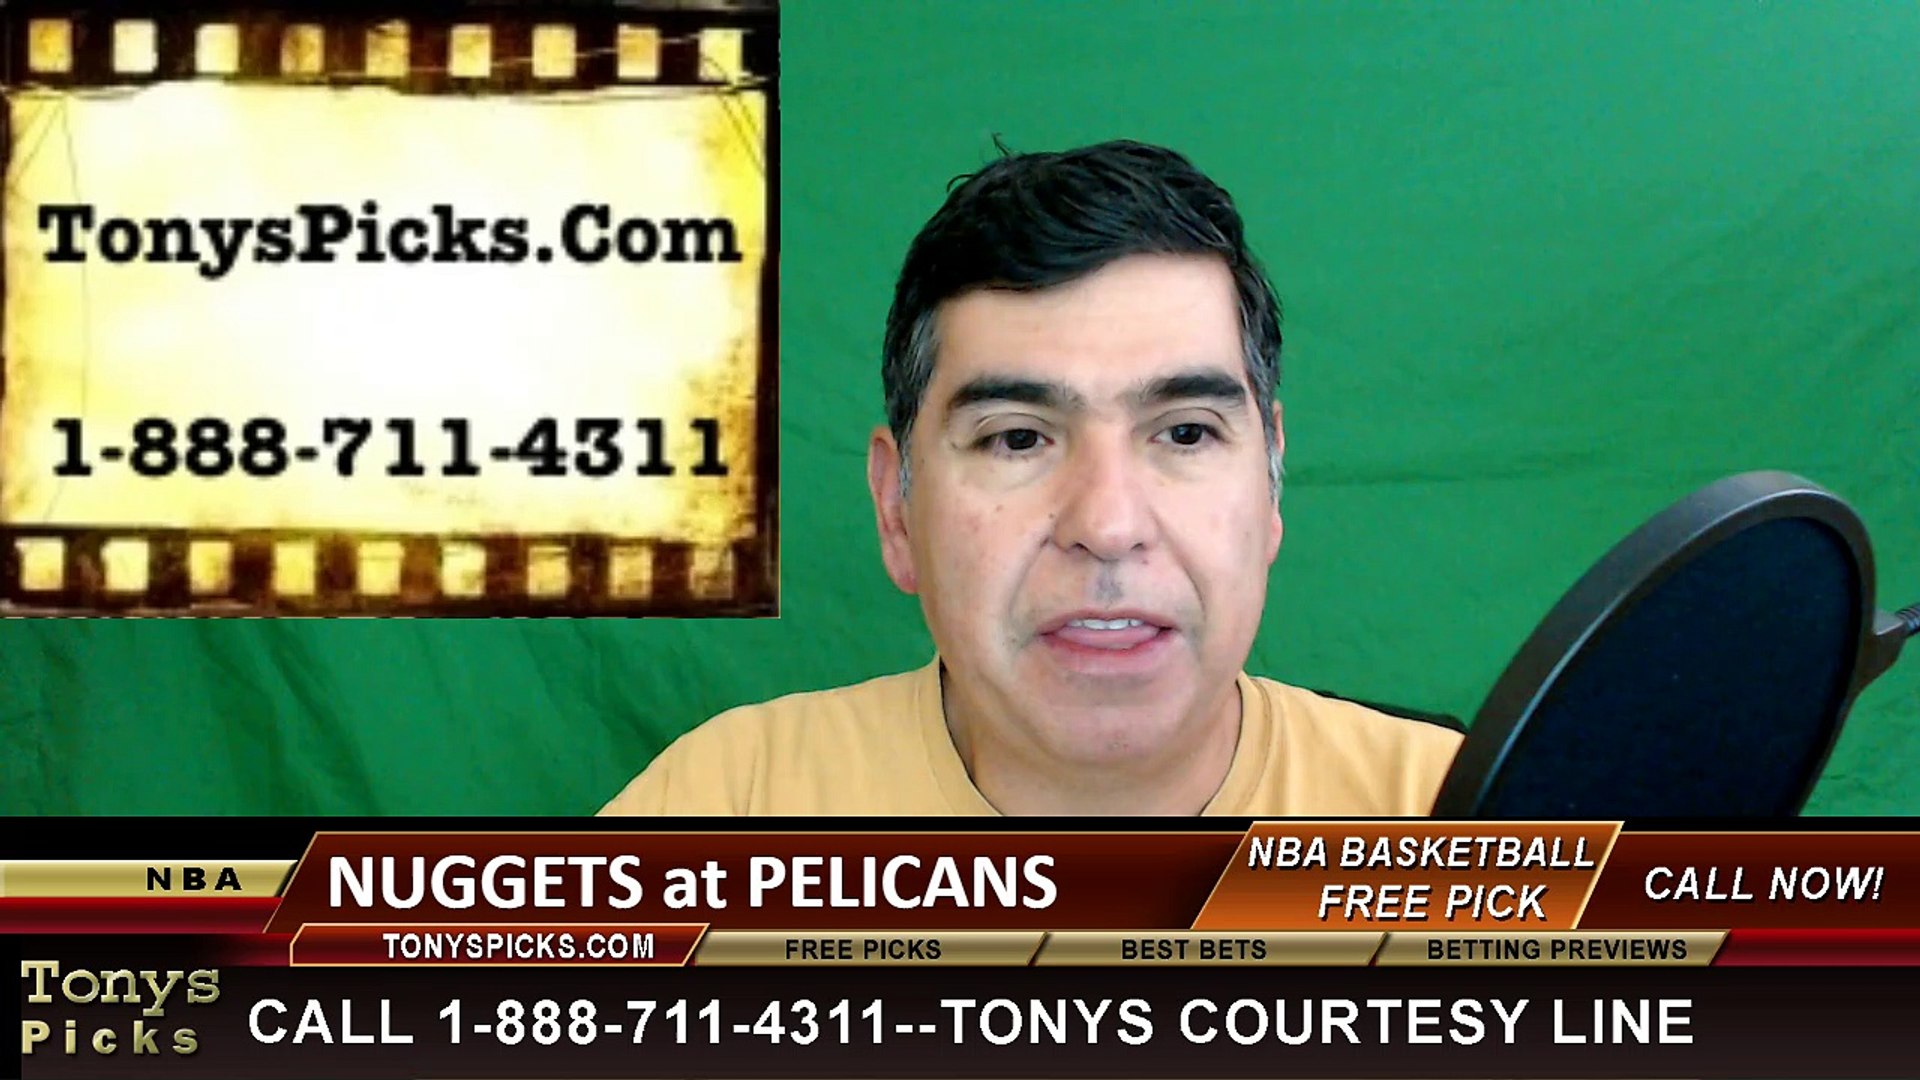 New Orleans Pelicans vs. Denver Nuggets Free Pick Prediction NBA Pro Basketball Odds Preview 3-31-20